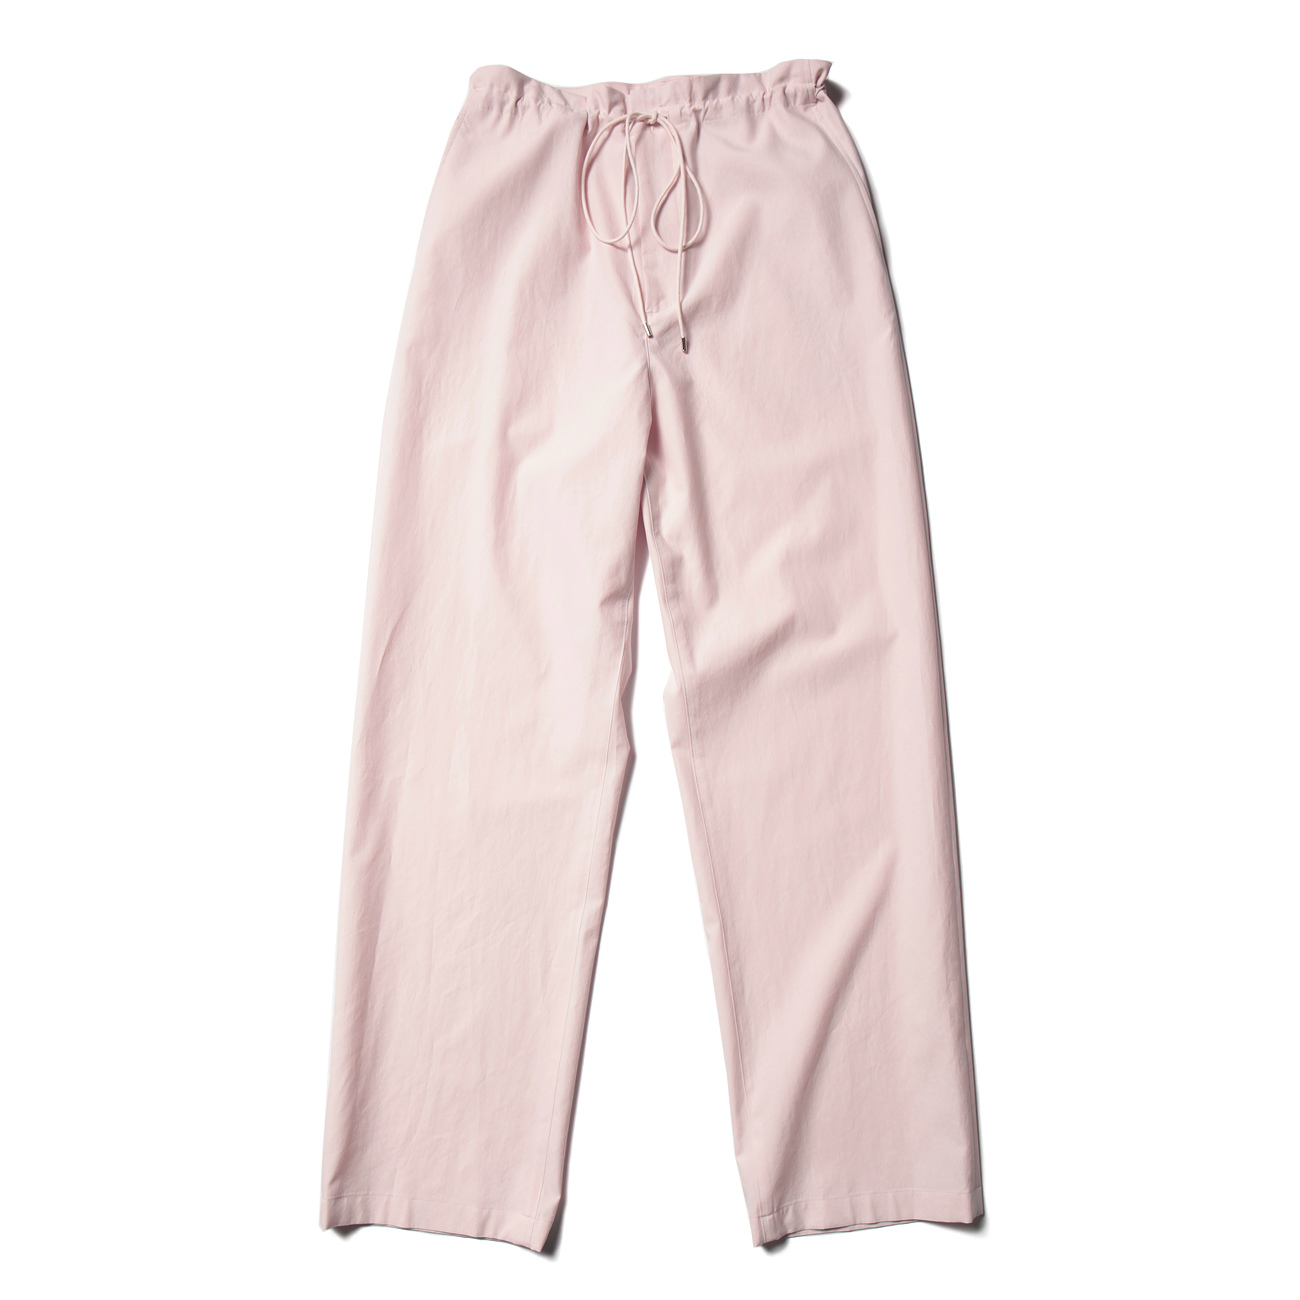 AURALEE / オーラリー | WASHED FINX TWILL EASY WIDE PANTS - Light Pink | 通販 -  正規取扱店 | COLLECT STORE / コレクトストア